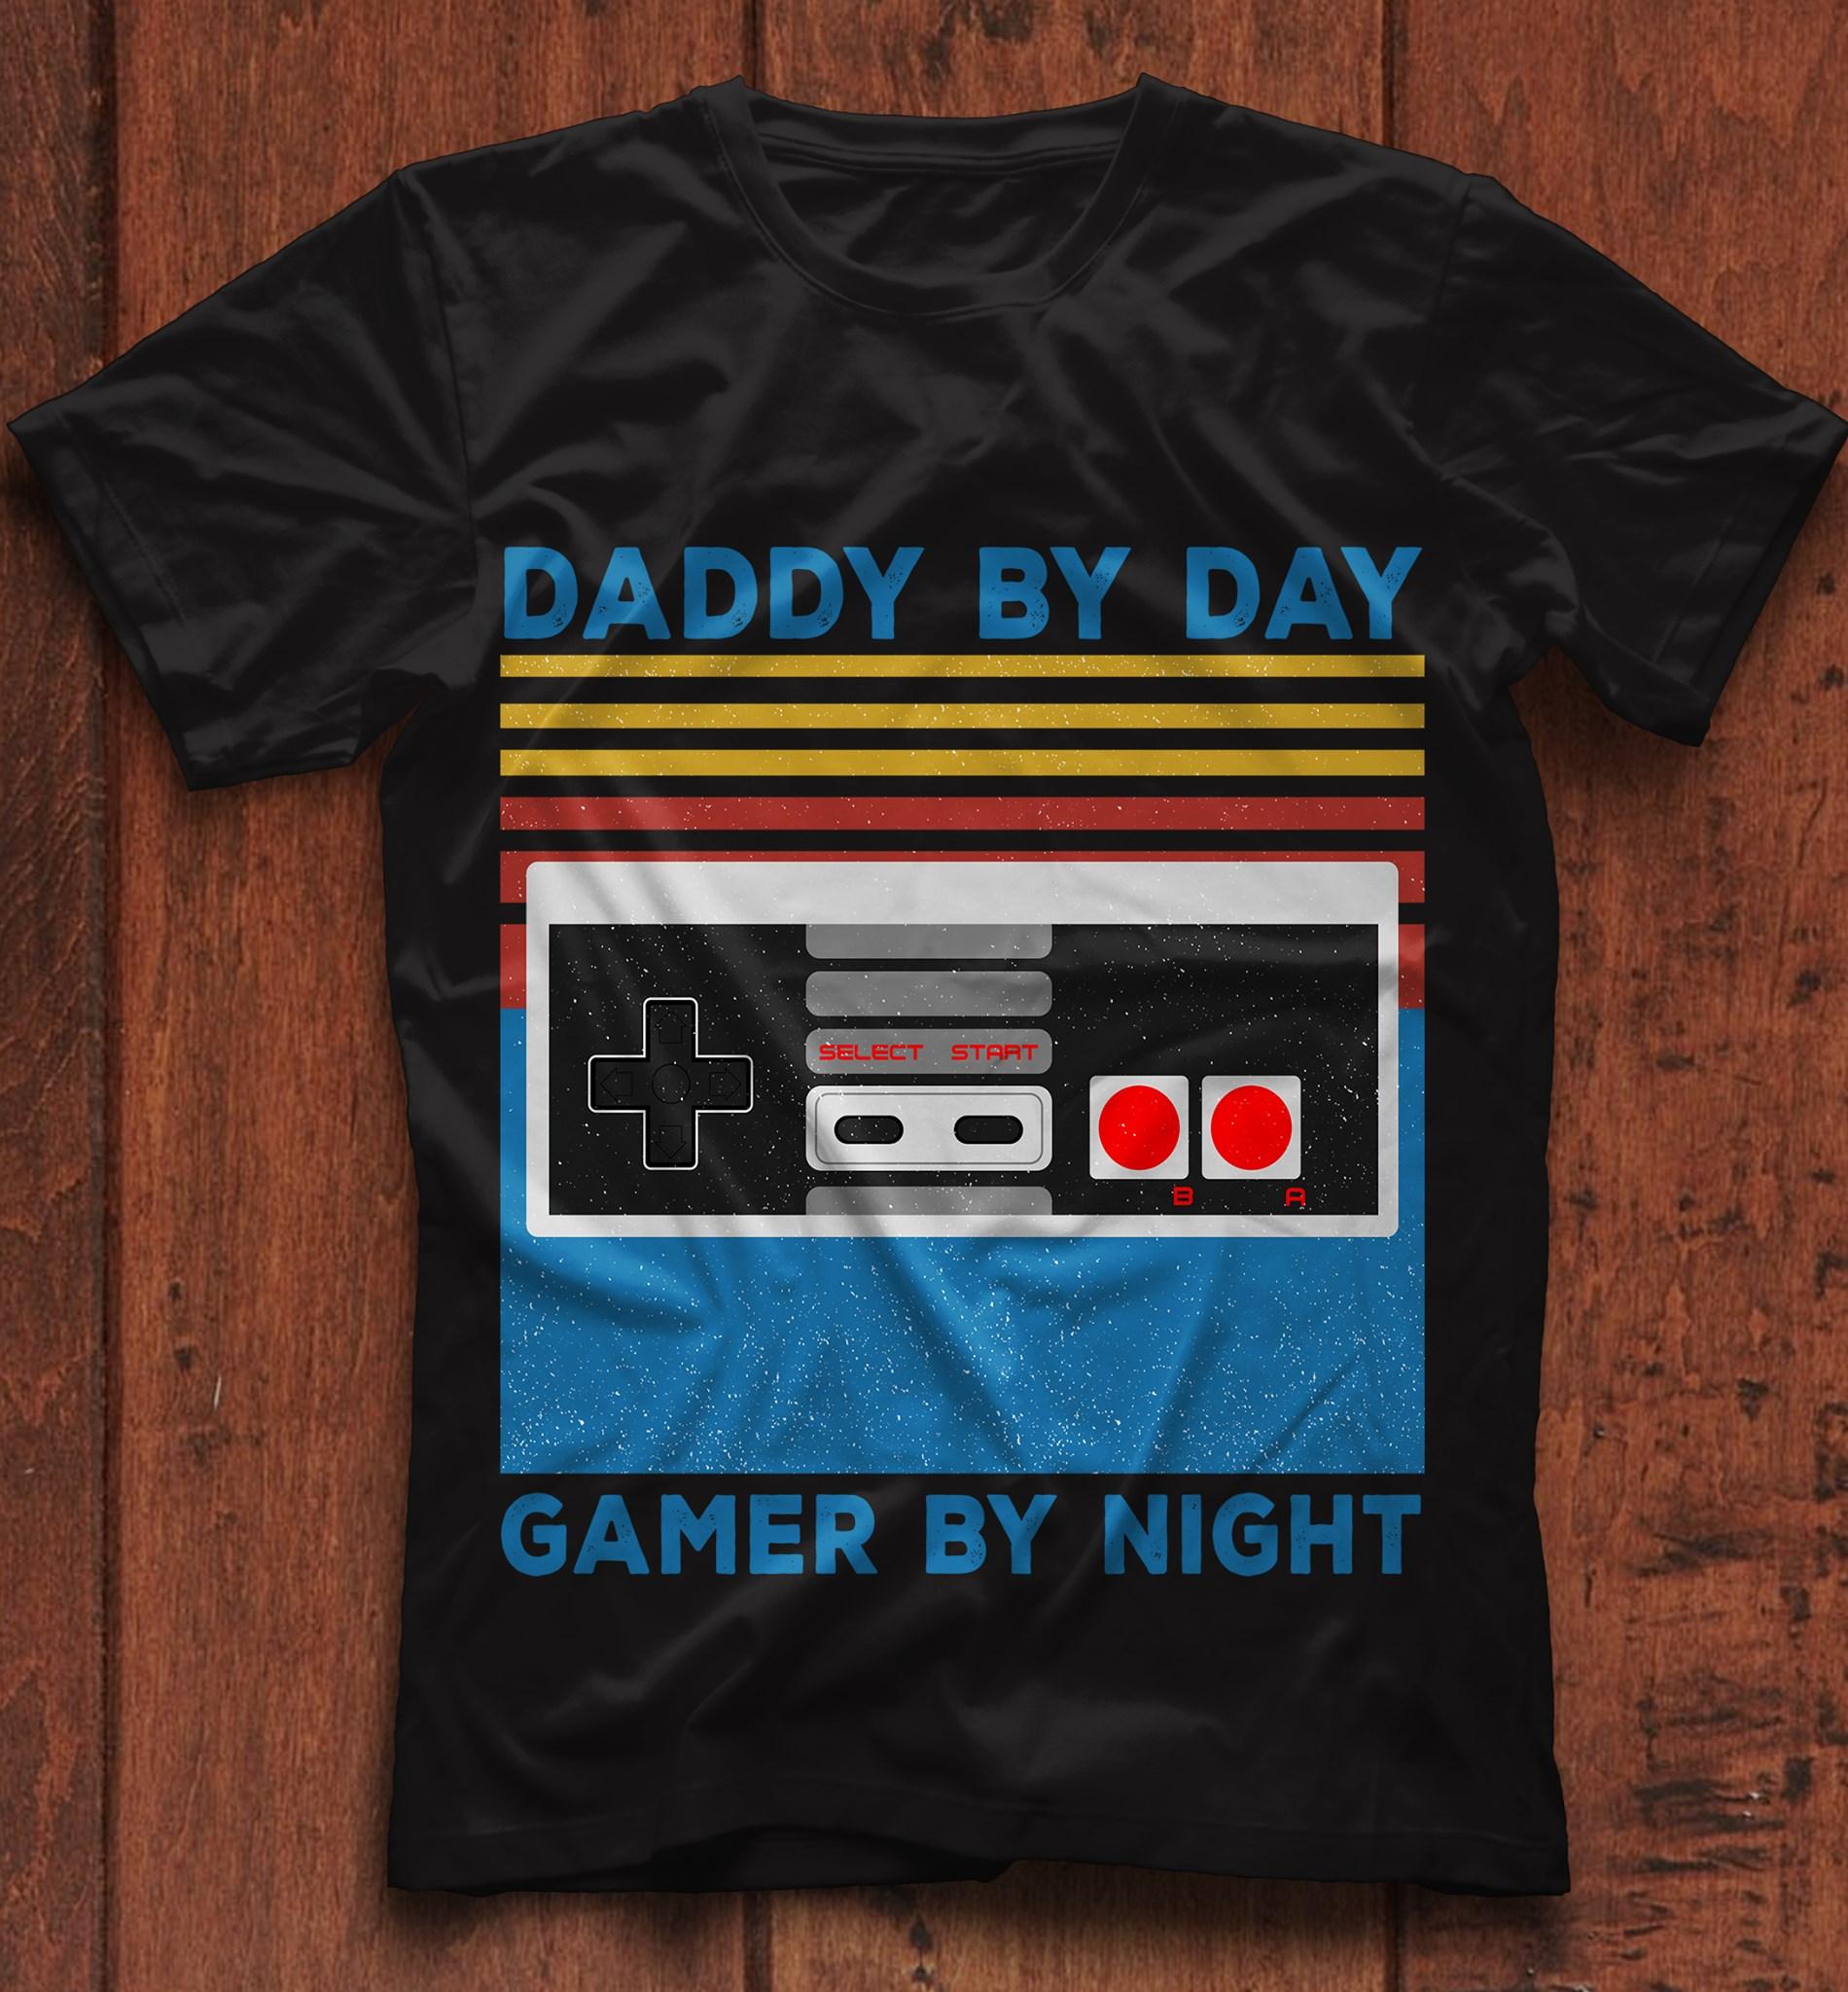 Daddy by day, gamer by night - Father the gamer, love playing video game